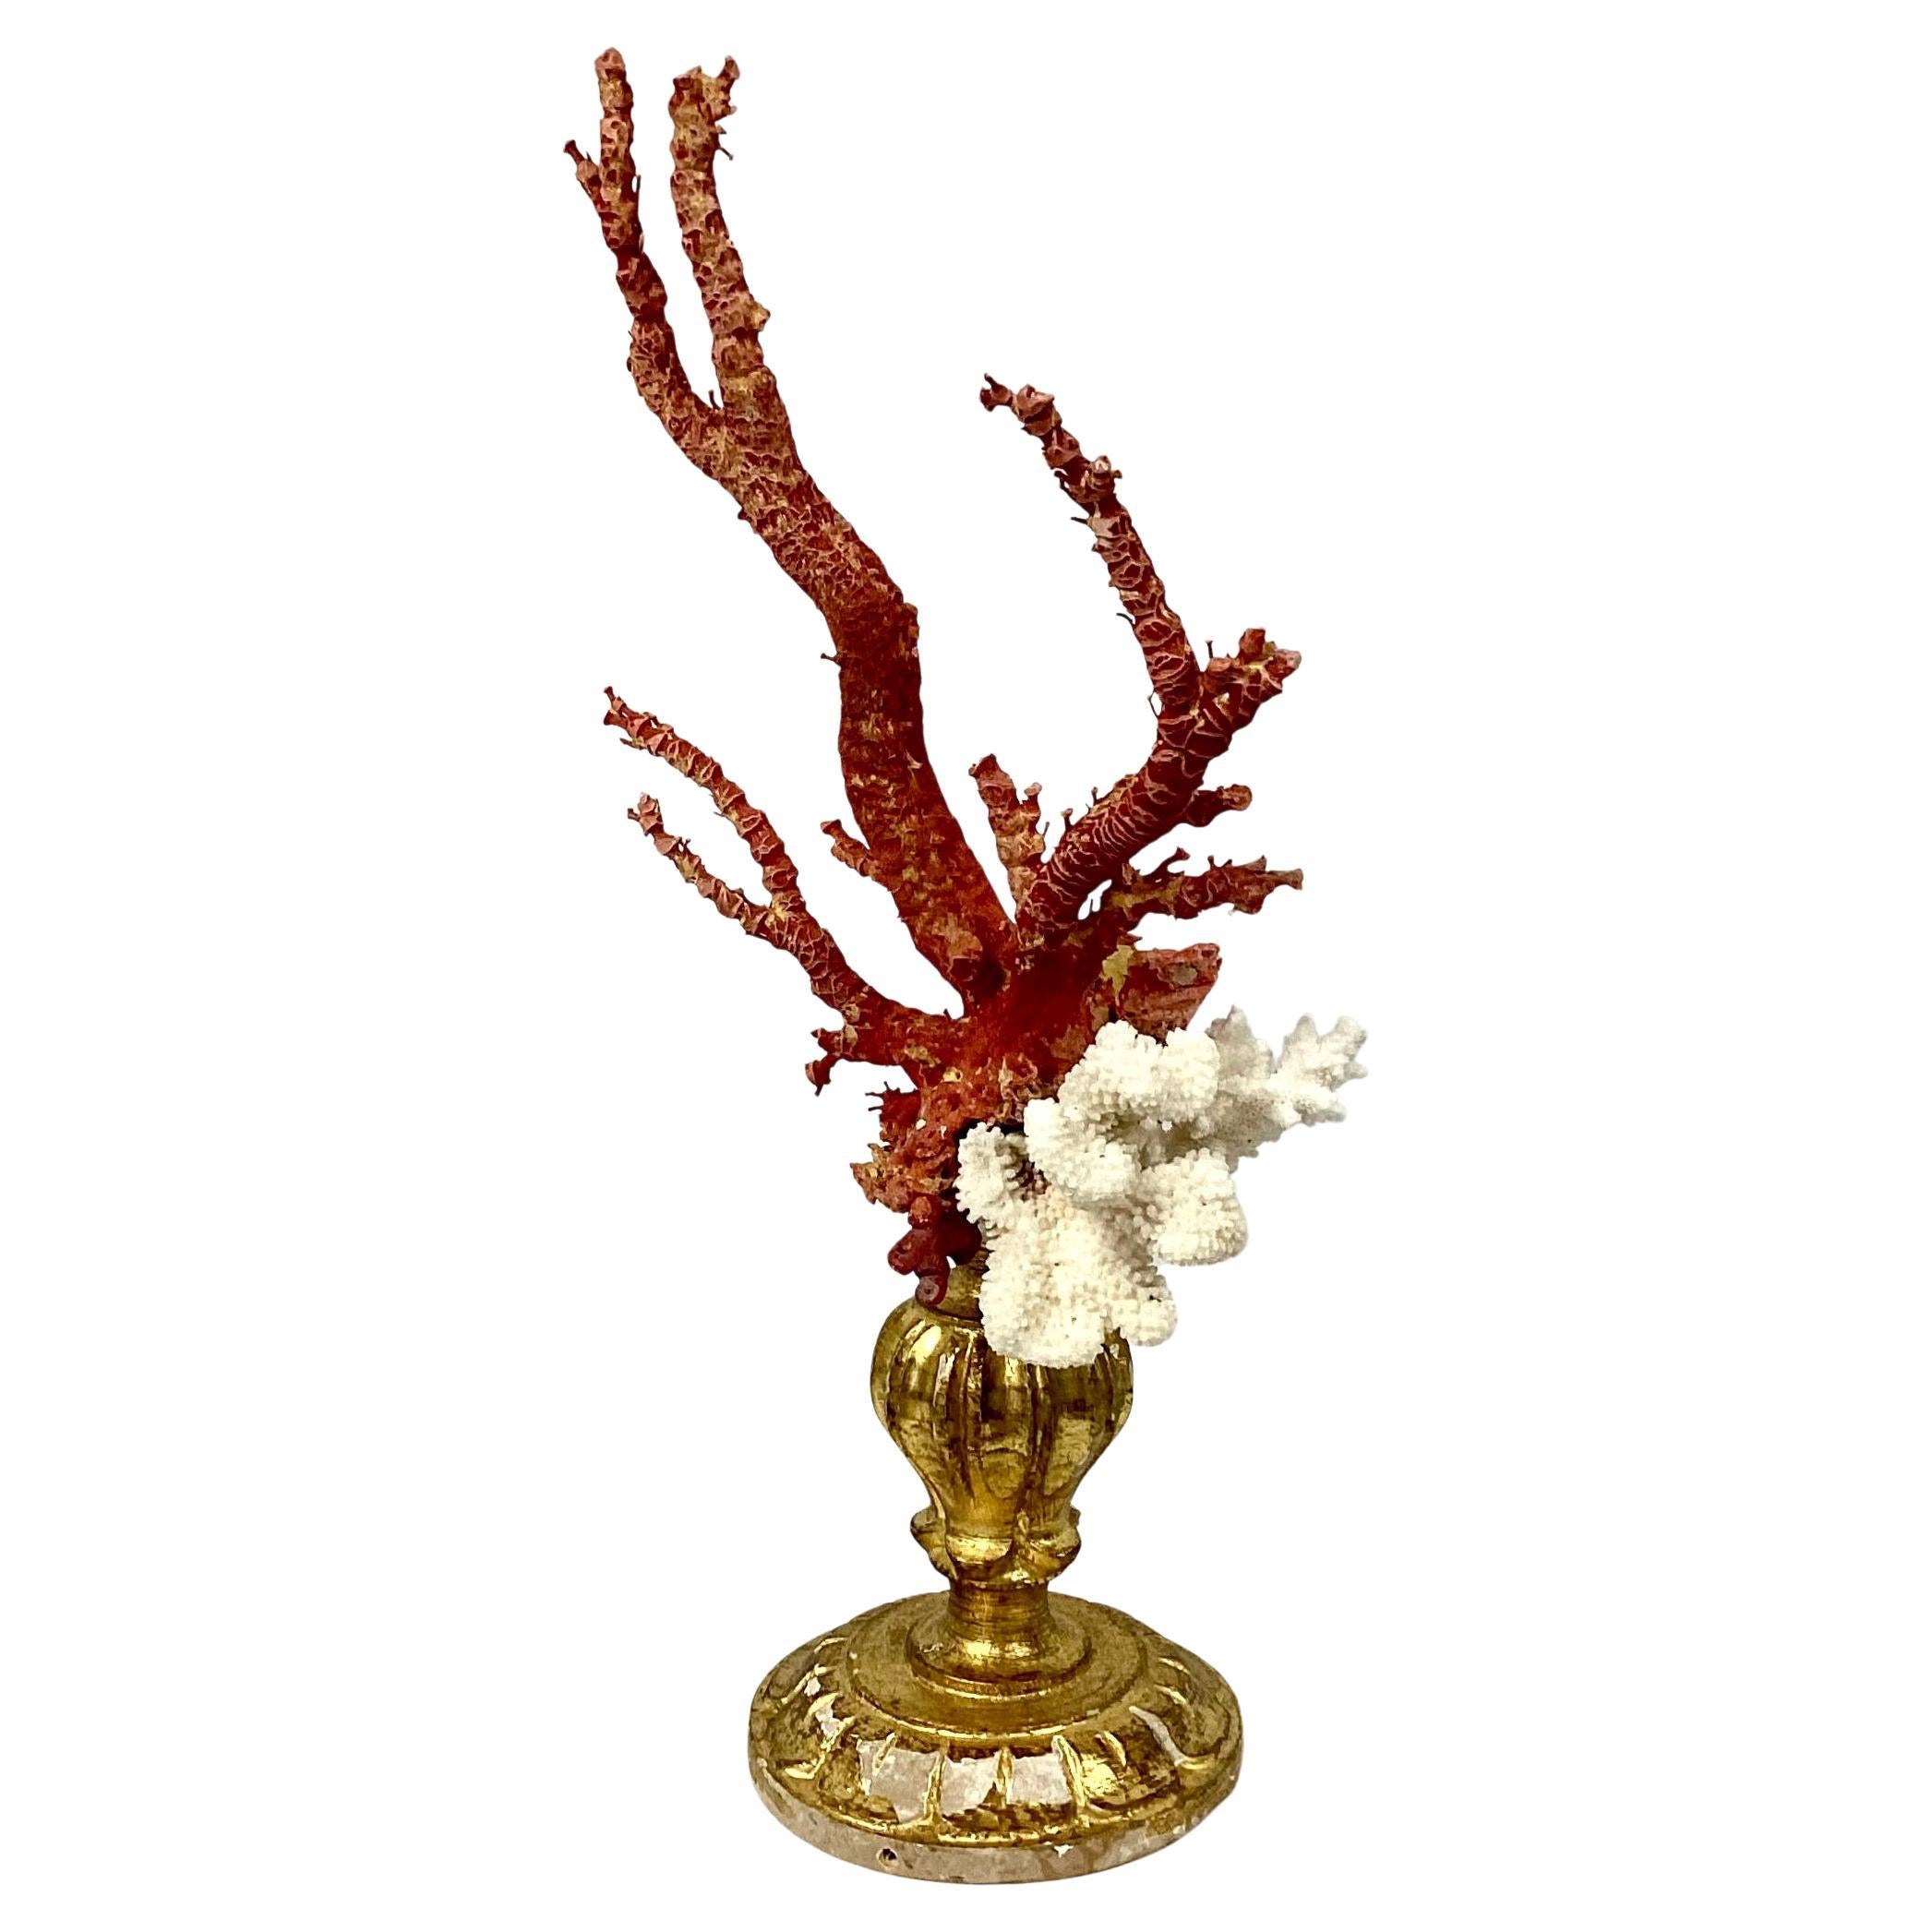 A rather large hand-crafted sculpture specimen of natural red coral branches mounted on a 18th century giltwood urn fragment base.